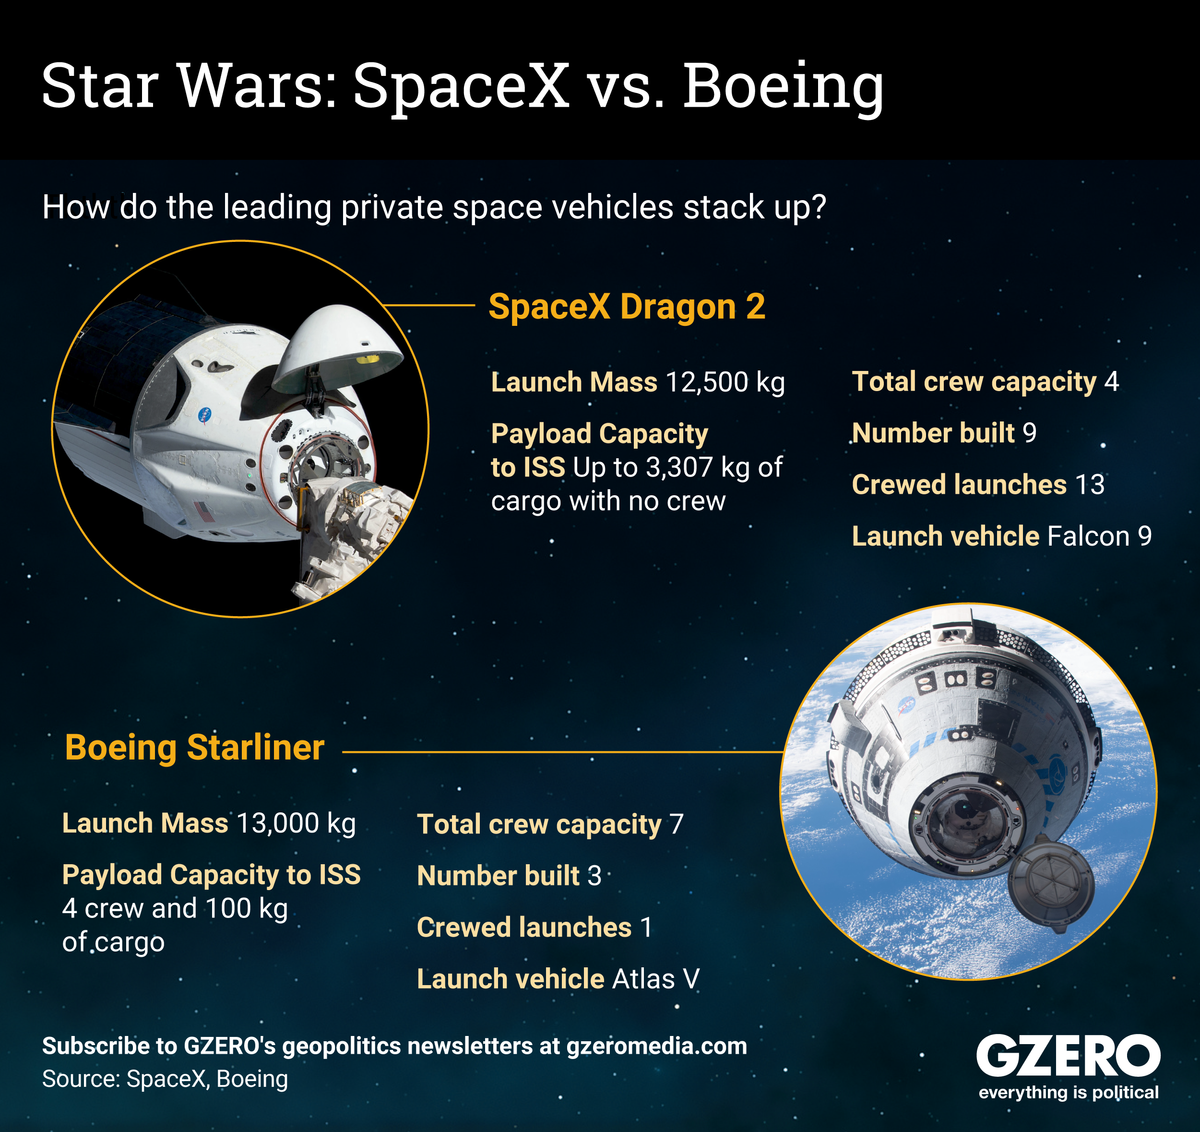 Graphic truth: Spacex vs. Boeing